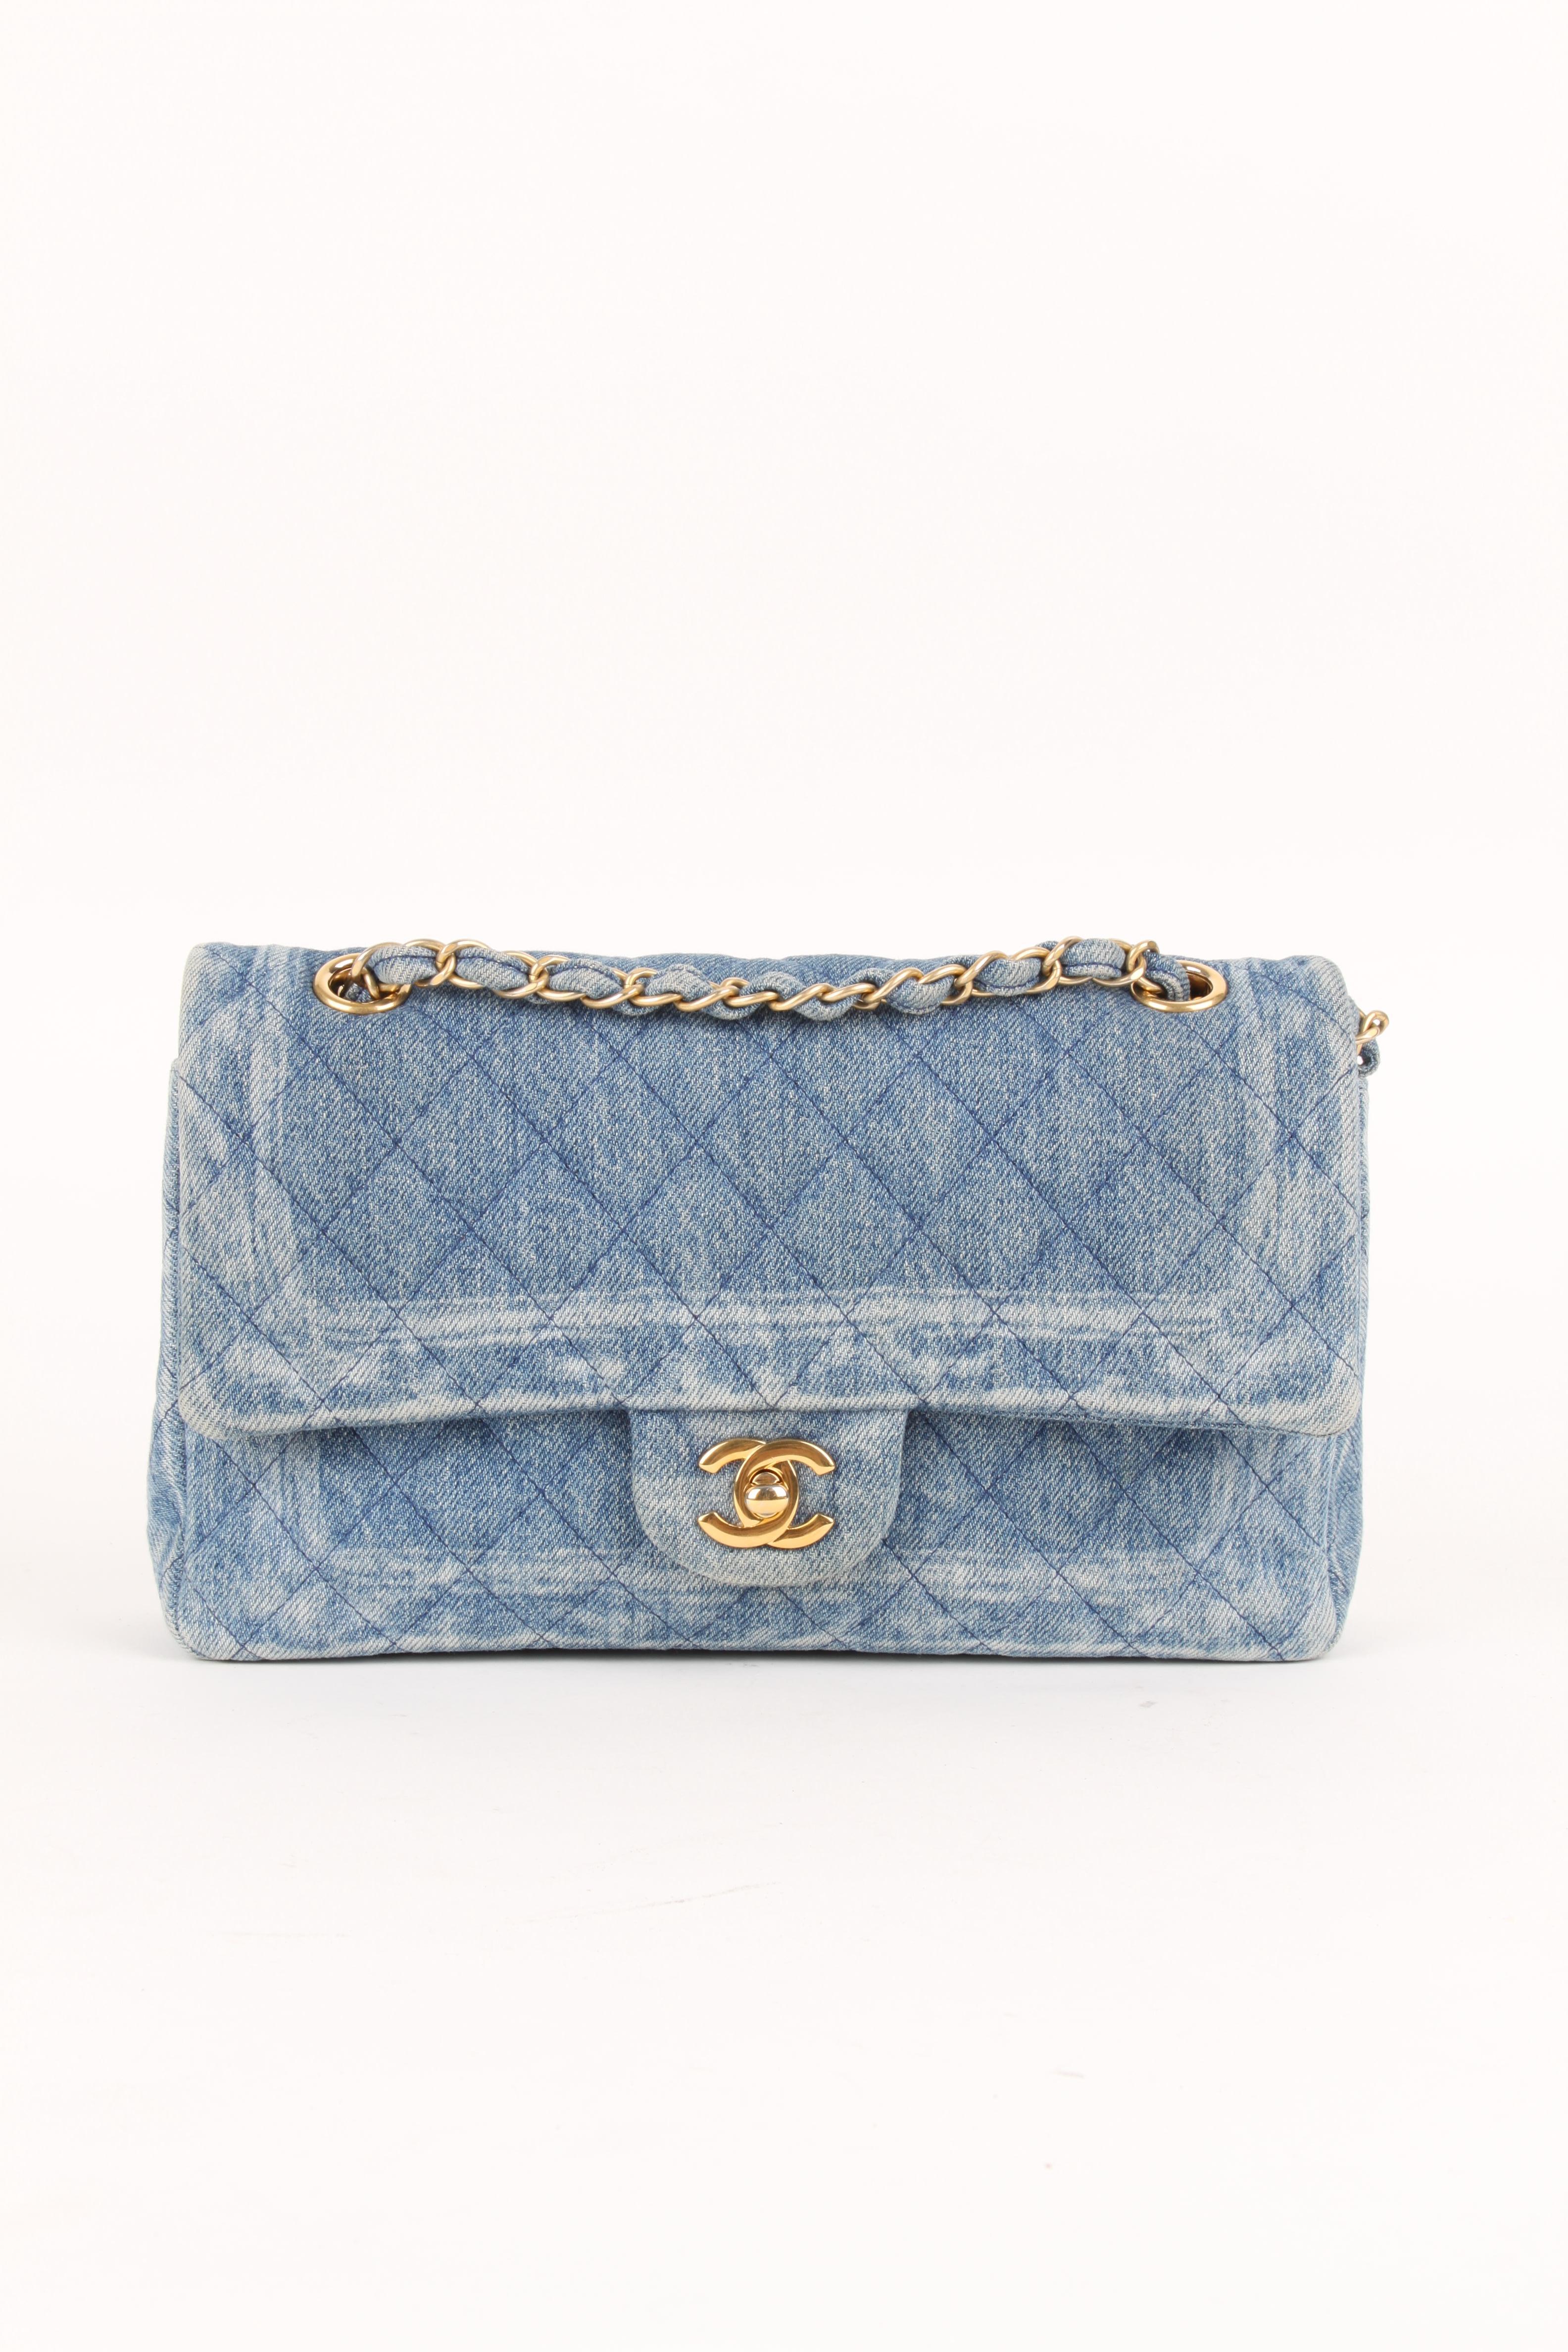 From 2017 Collection. Medium wash blue quilted denim Chanel Classic Medium Double Flap Bag with gold-tone hardware. 

COLOR: Blue
MATERIAL: Denim
HARDWARE: Gold
CONDITION: 9/10
COMES WITH: Dustbag
MEASURES: H 25 CM, B 15 CM, D 6 CM.
ORGIN: